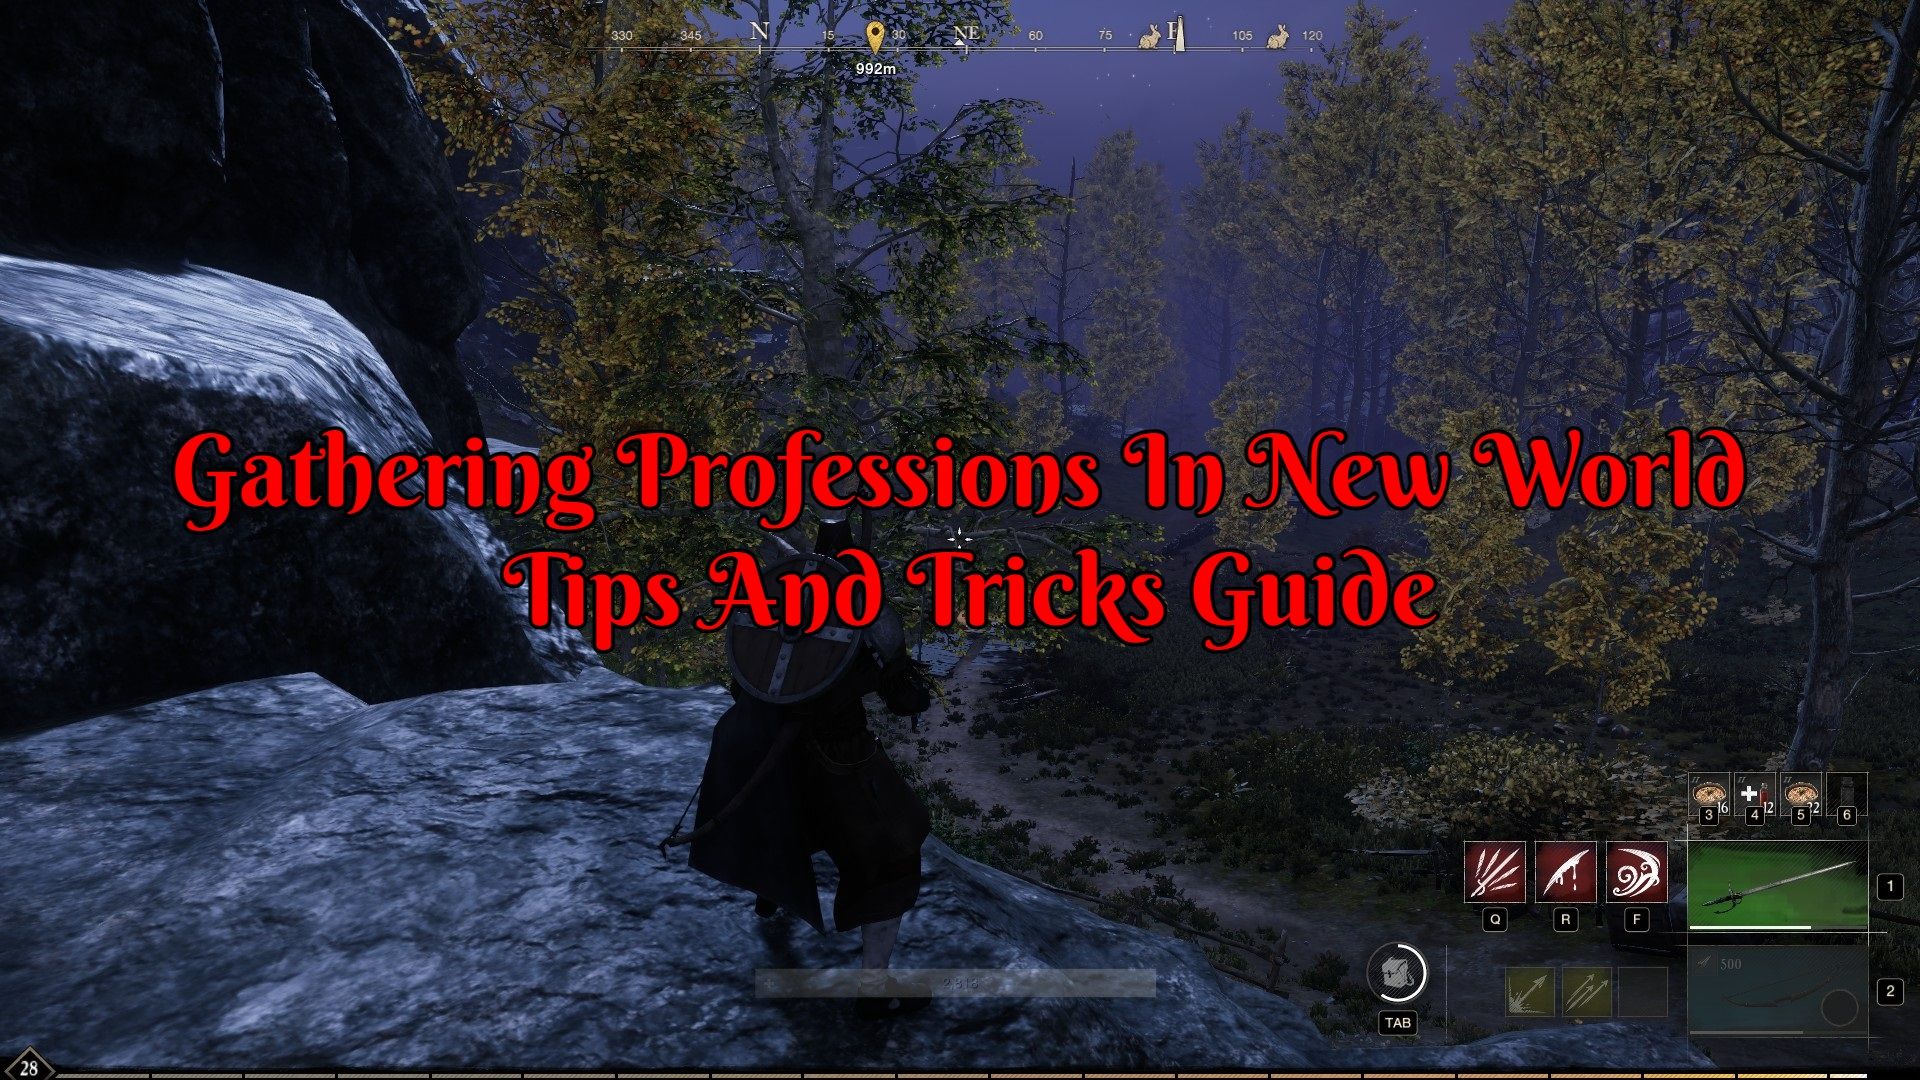 Gathering Professions In New World Tips And Tricks Guide.jpg